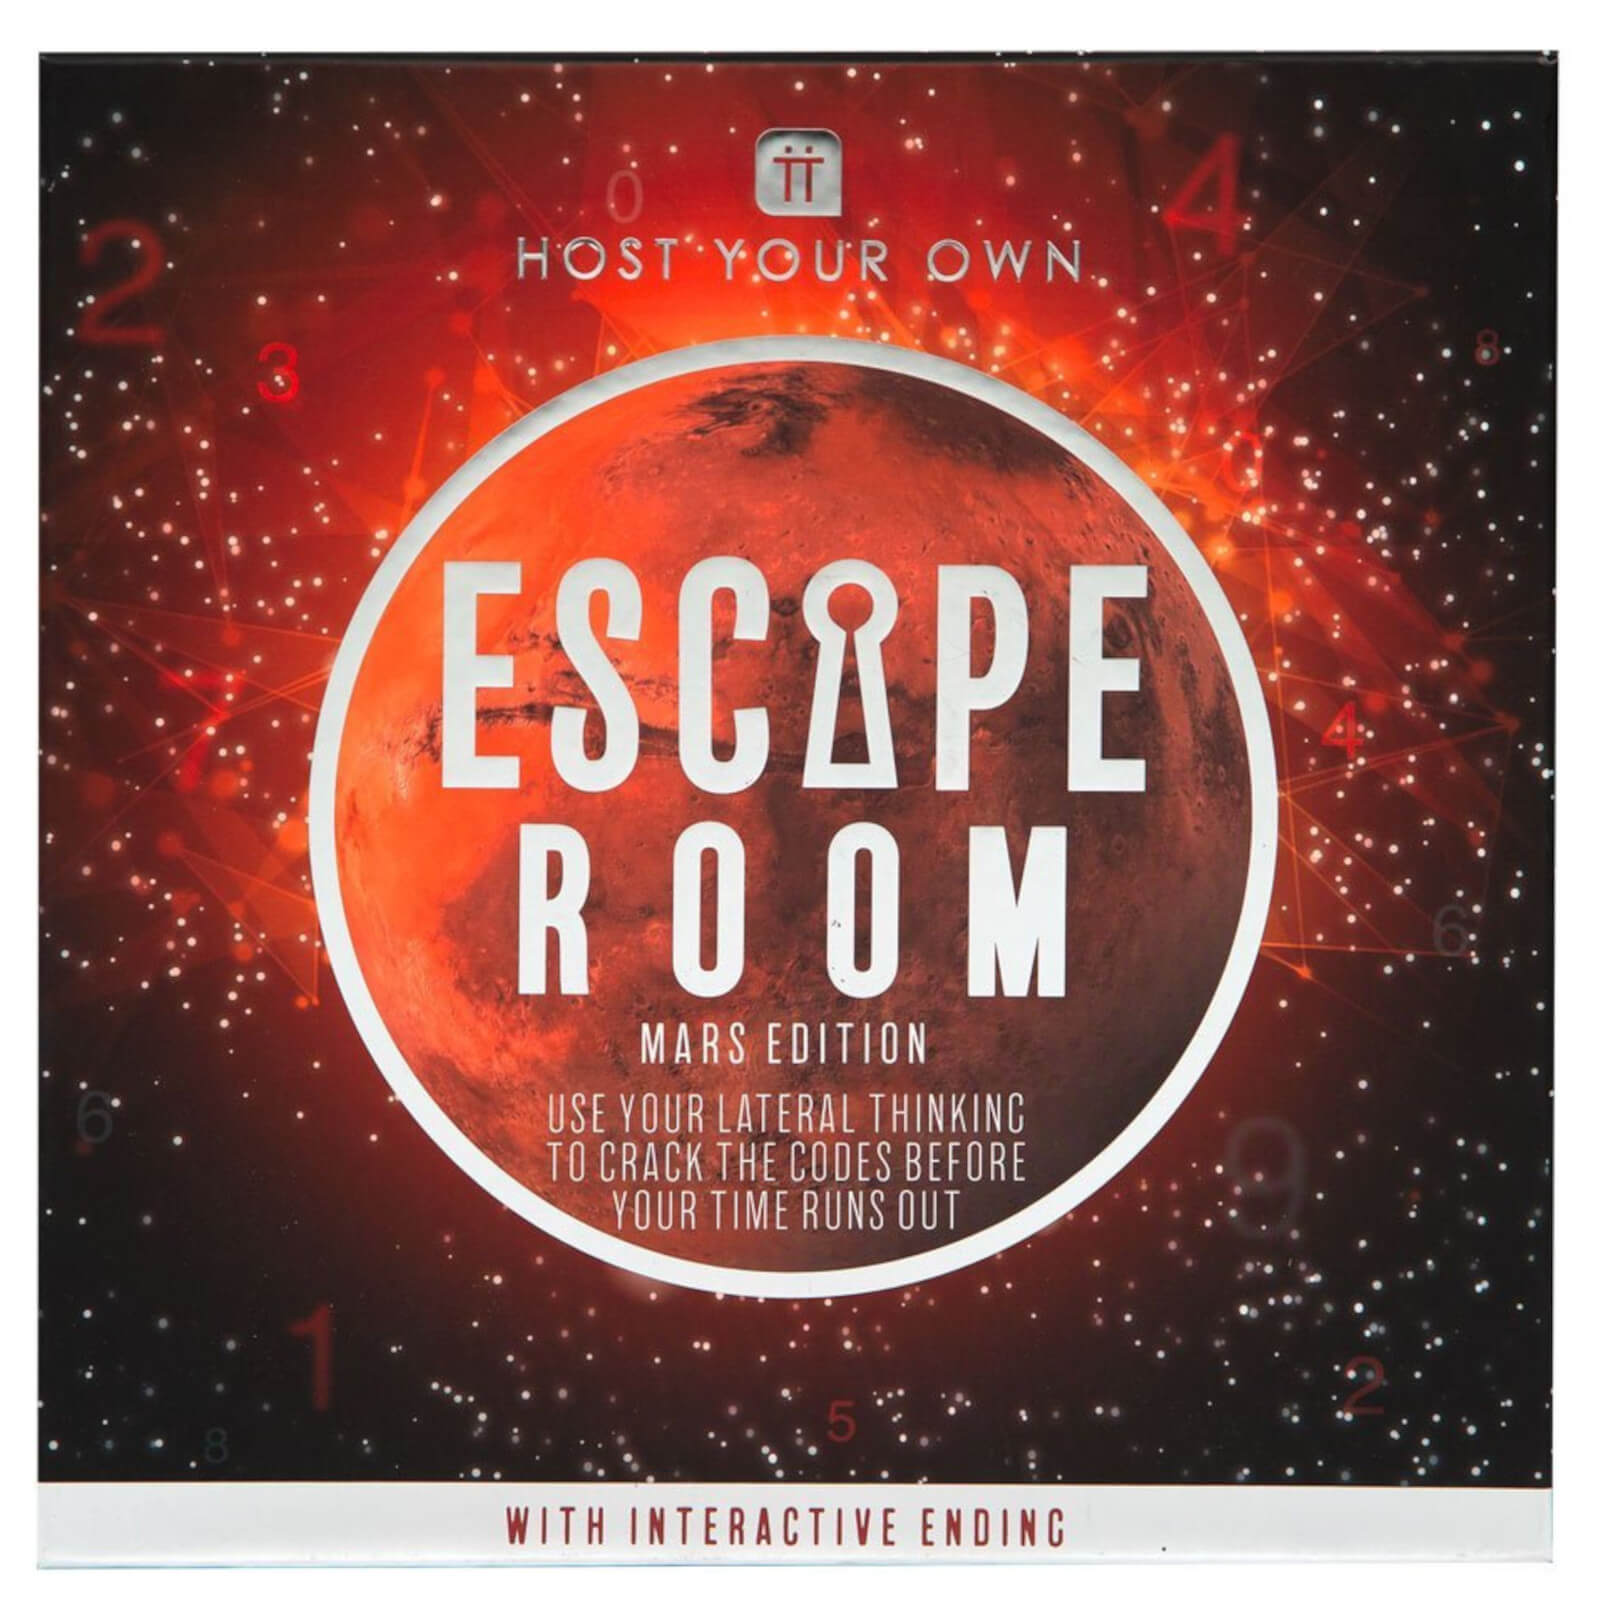 Image of Host Your Own Escape Room Game Mars Edition